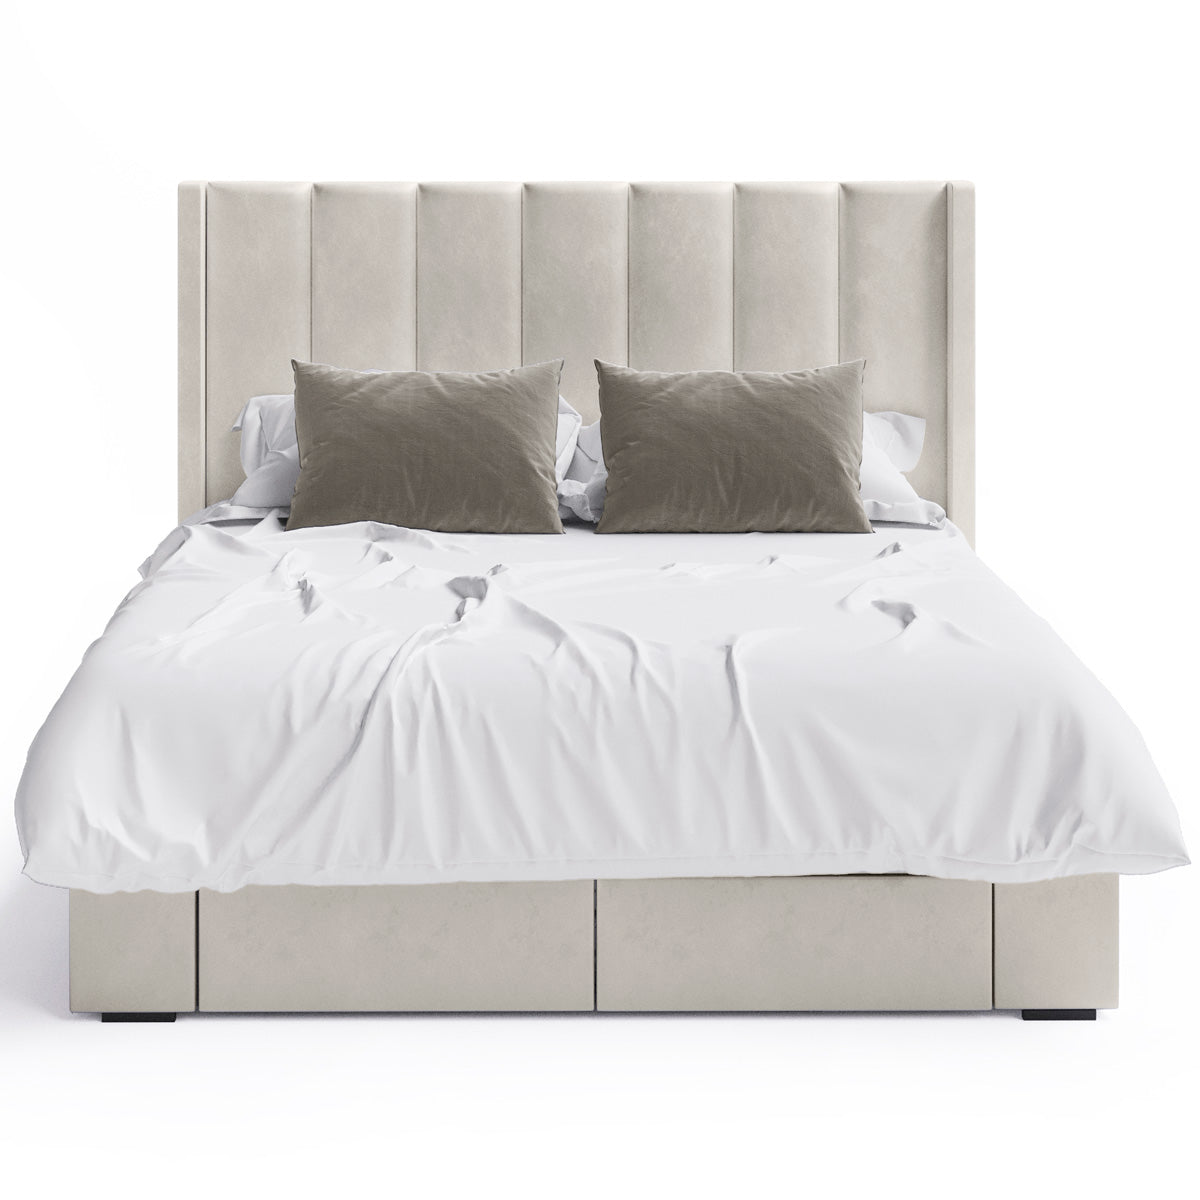 Emilie Winged Storage Bed Frame with Four Extra Large Drawers (Taupe White Velvet)